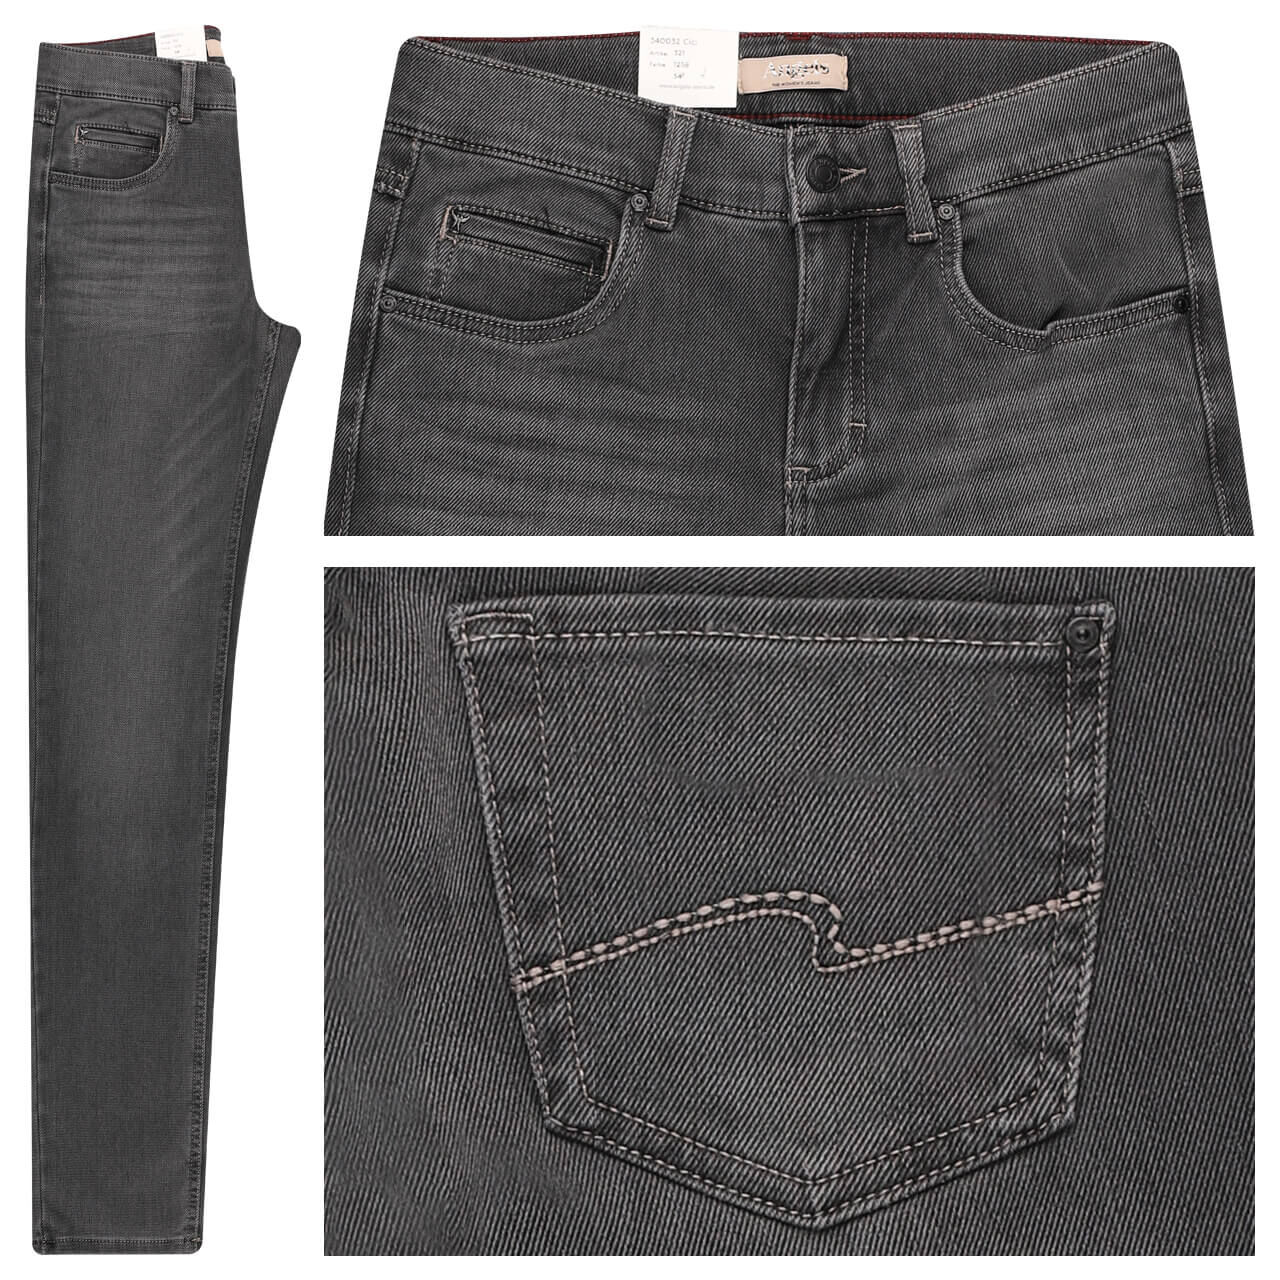 Angels Cici Jeans grey used buffi thermo denim